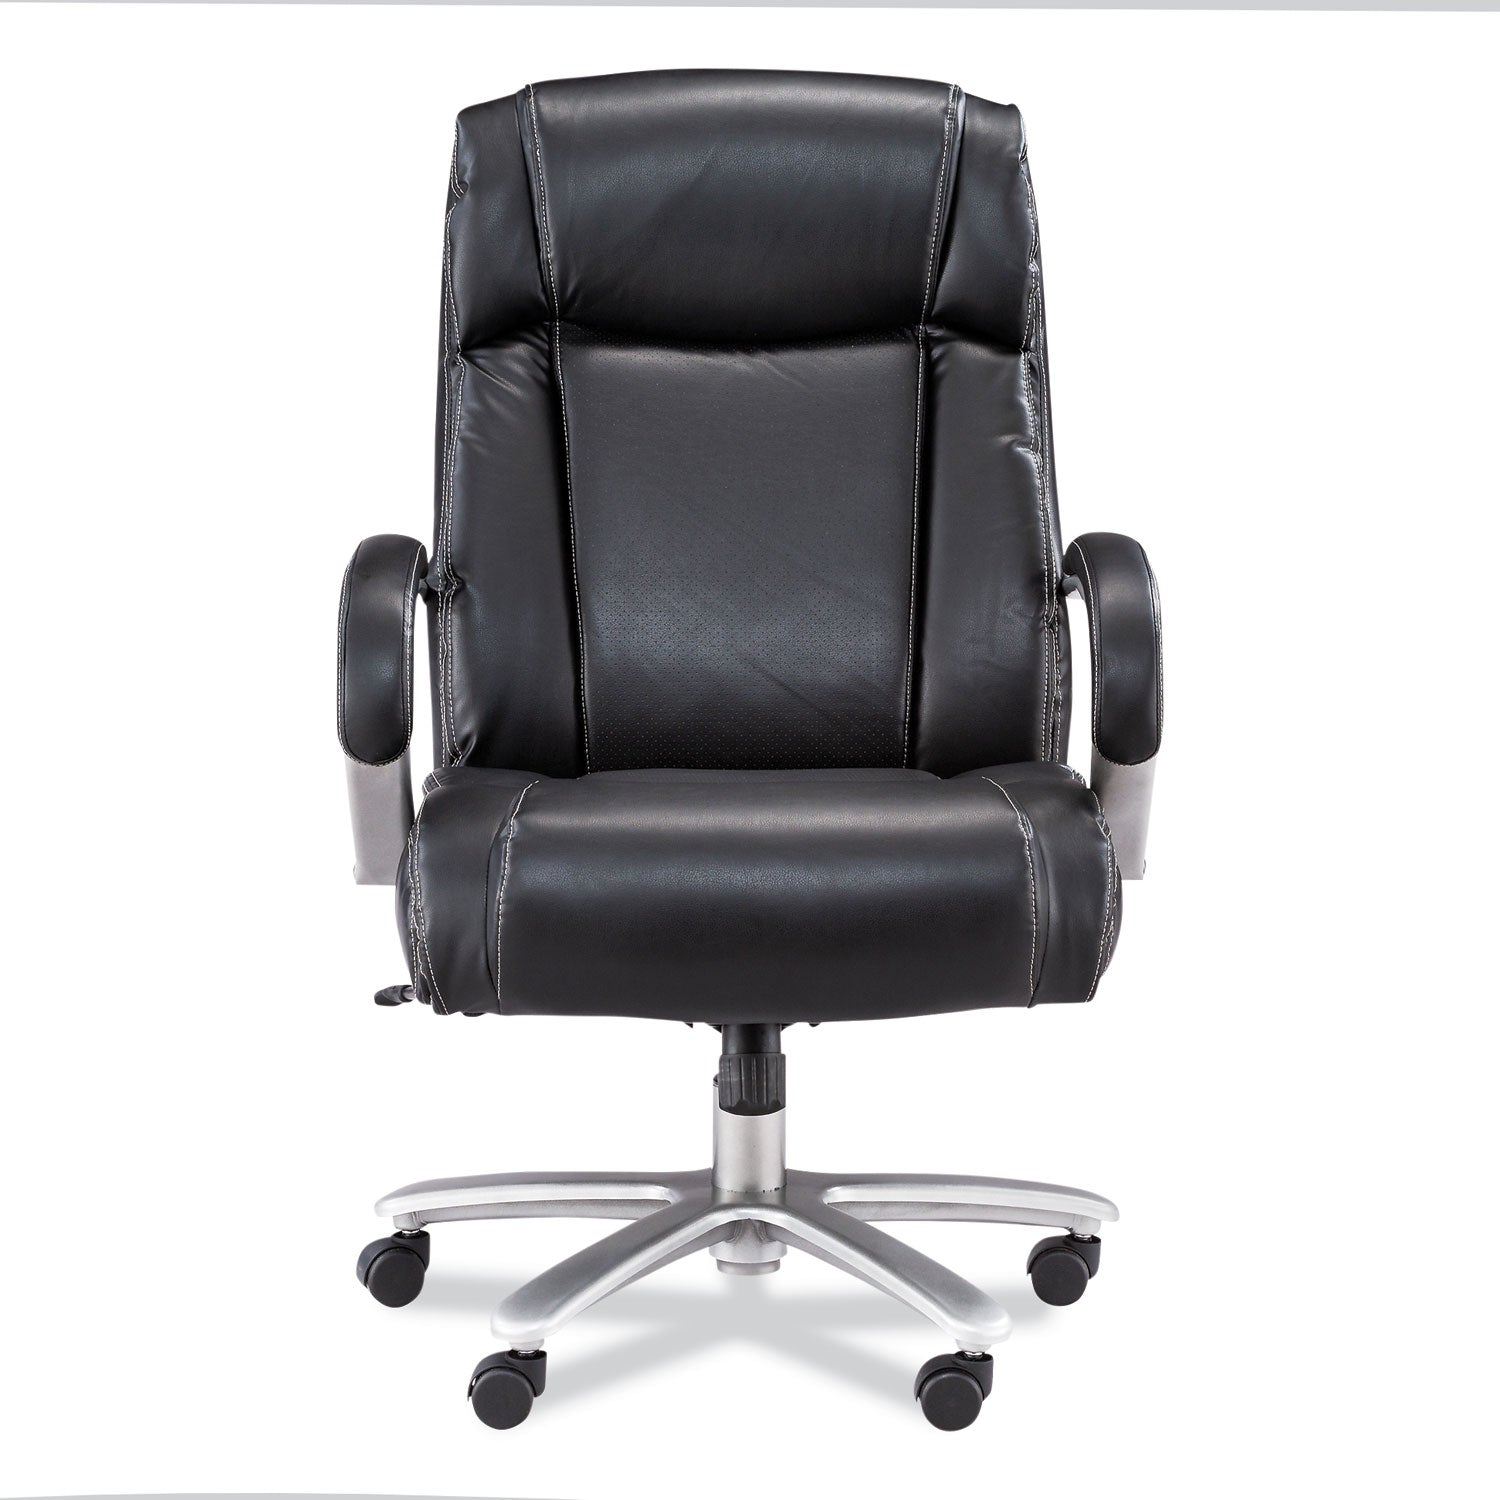 lineage-big-&-tall-high-back-task-chair-max-500-lb-205-to-2425-high-black-seat-chrome-base-ships-in-1-3-business-days_saf3502bl - 4